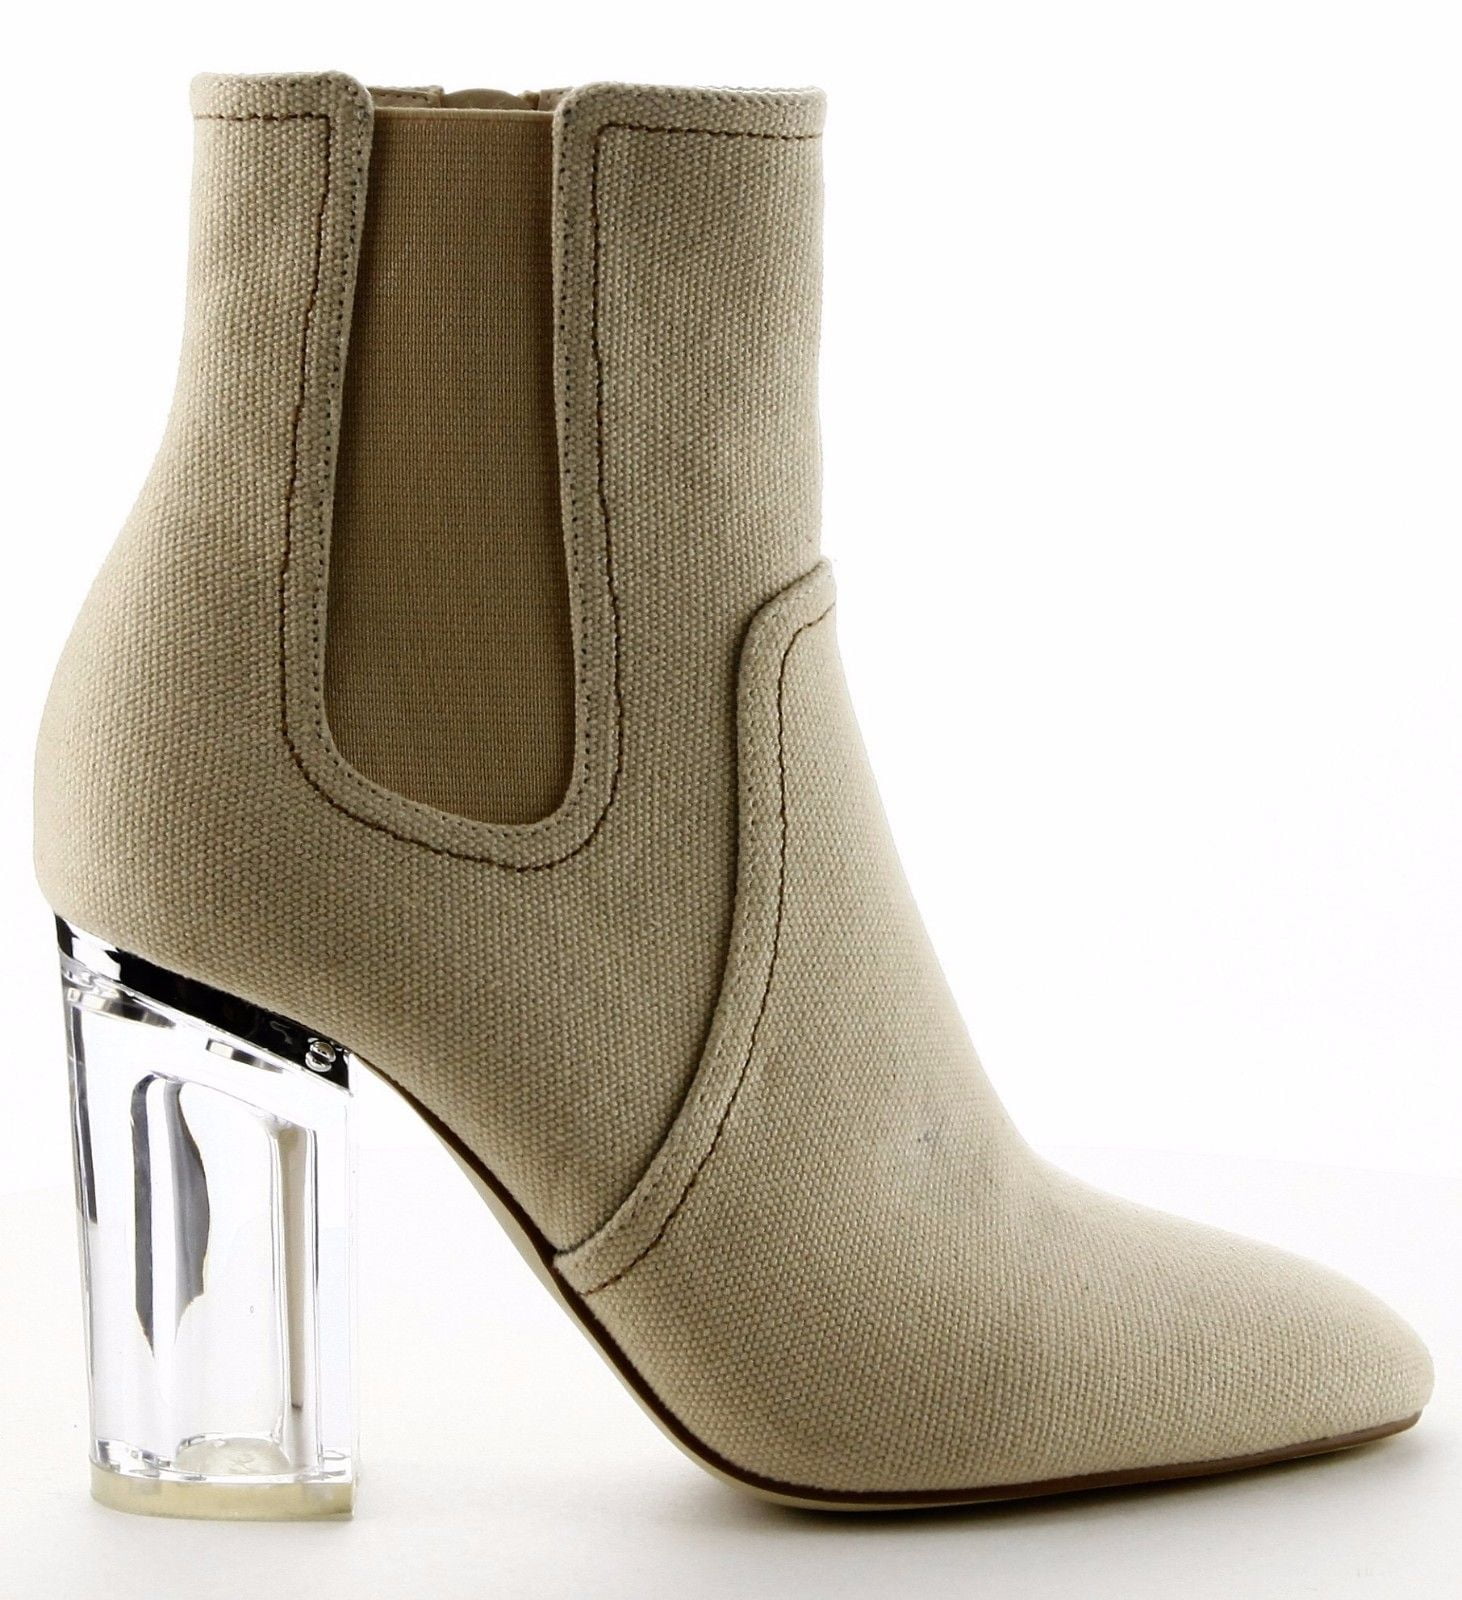 Cape Robbin Fay 10 Elastic Ankle High Lucite Clear Block Chunky Heel Bootie Shoe Canvas Nude